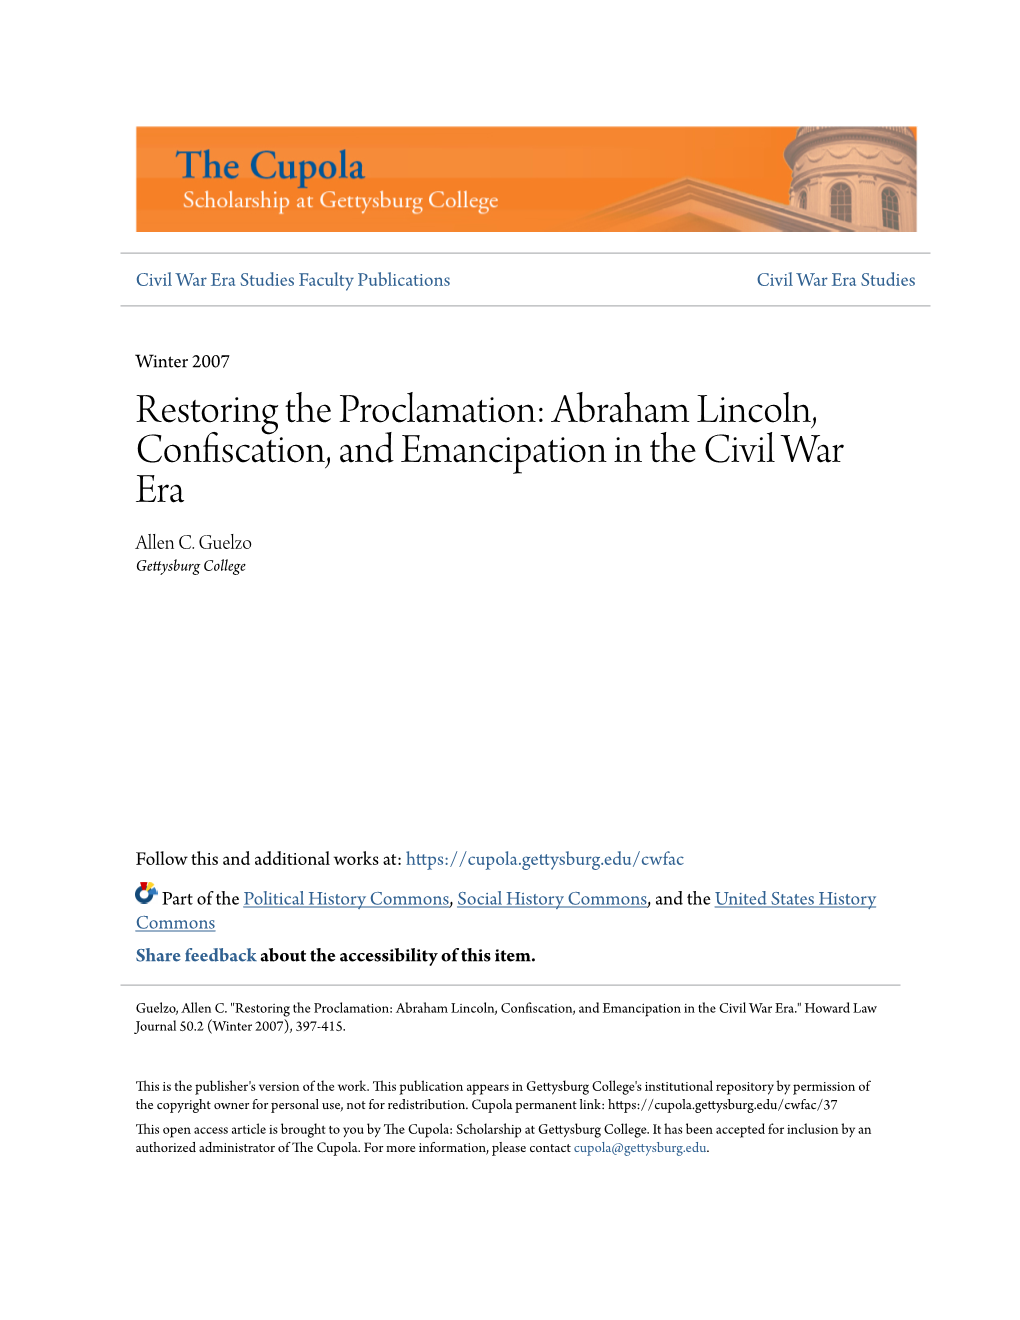 Abraham Lincoln, Confiscation, and Emancipation in the Civil War Era Allen C